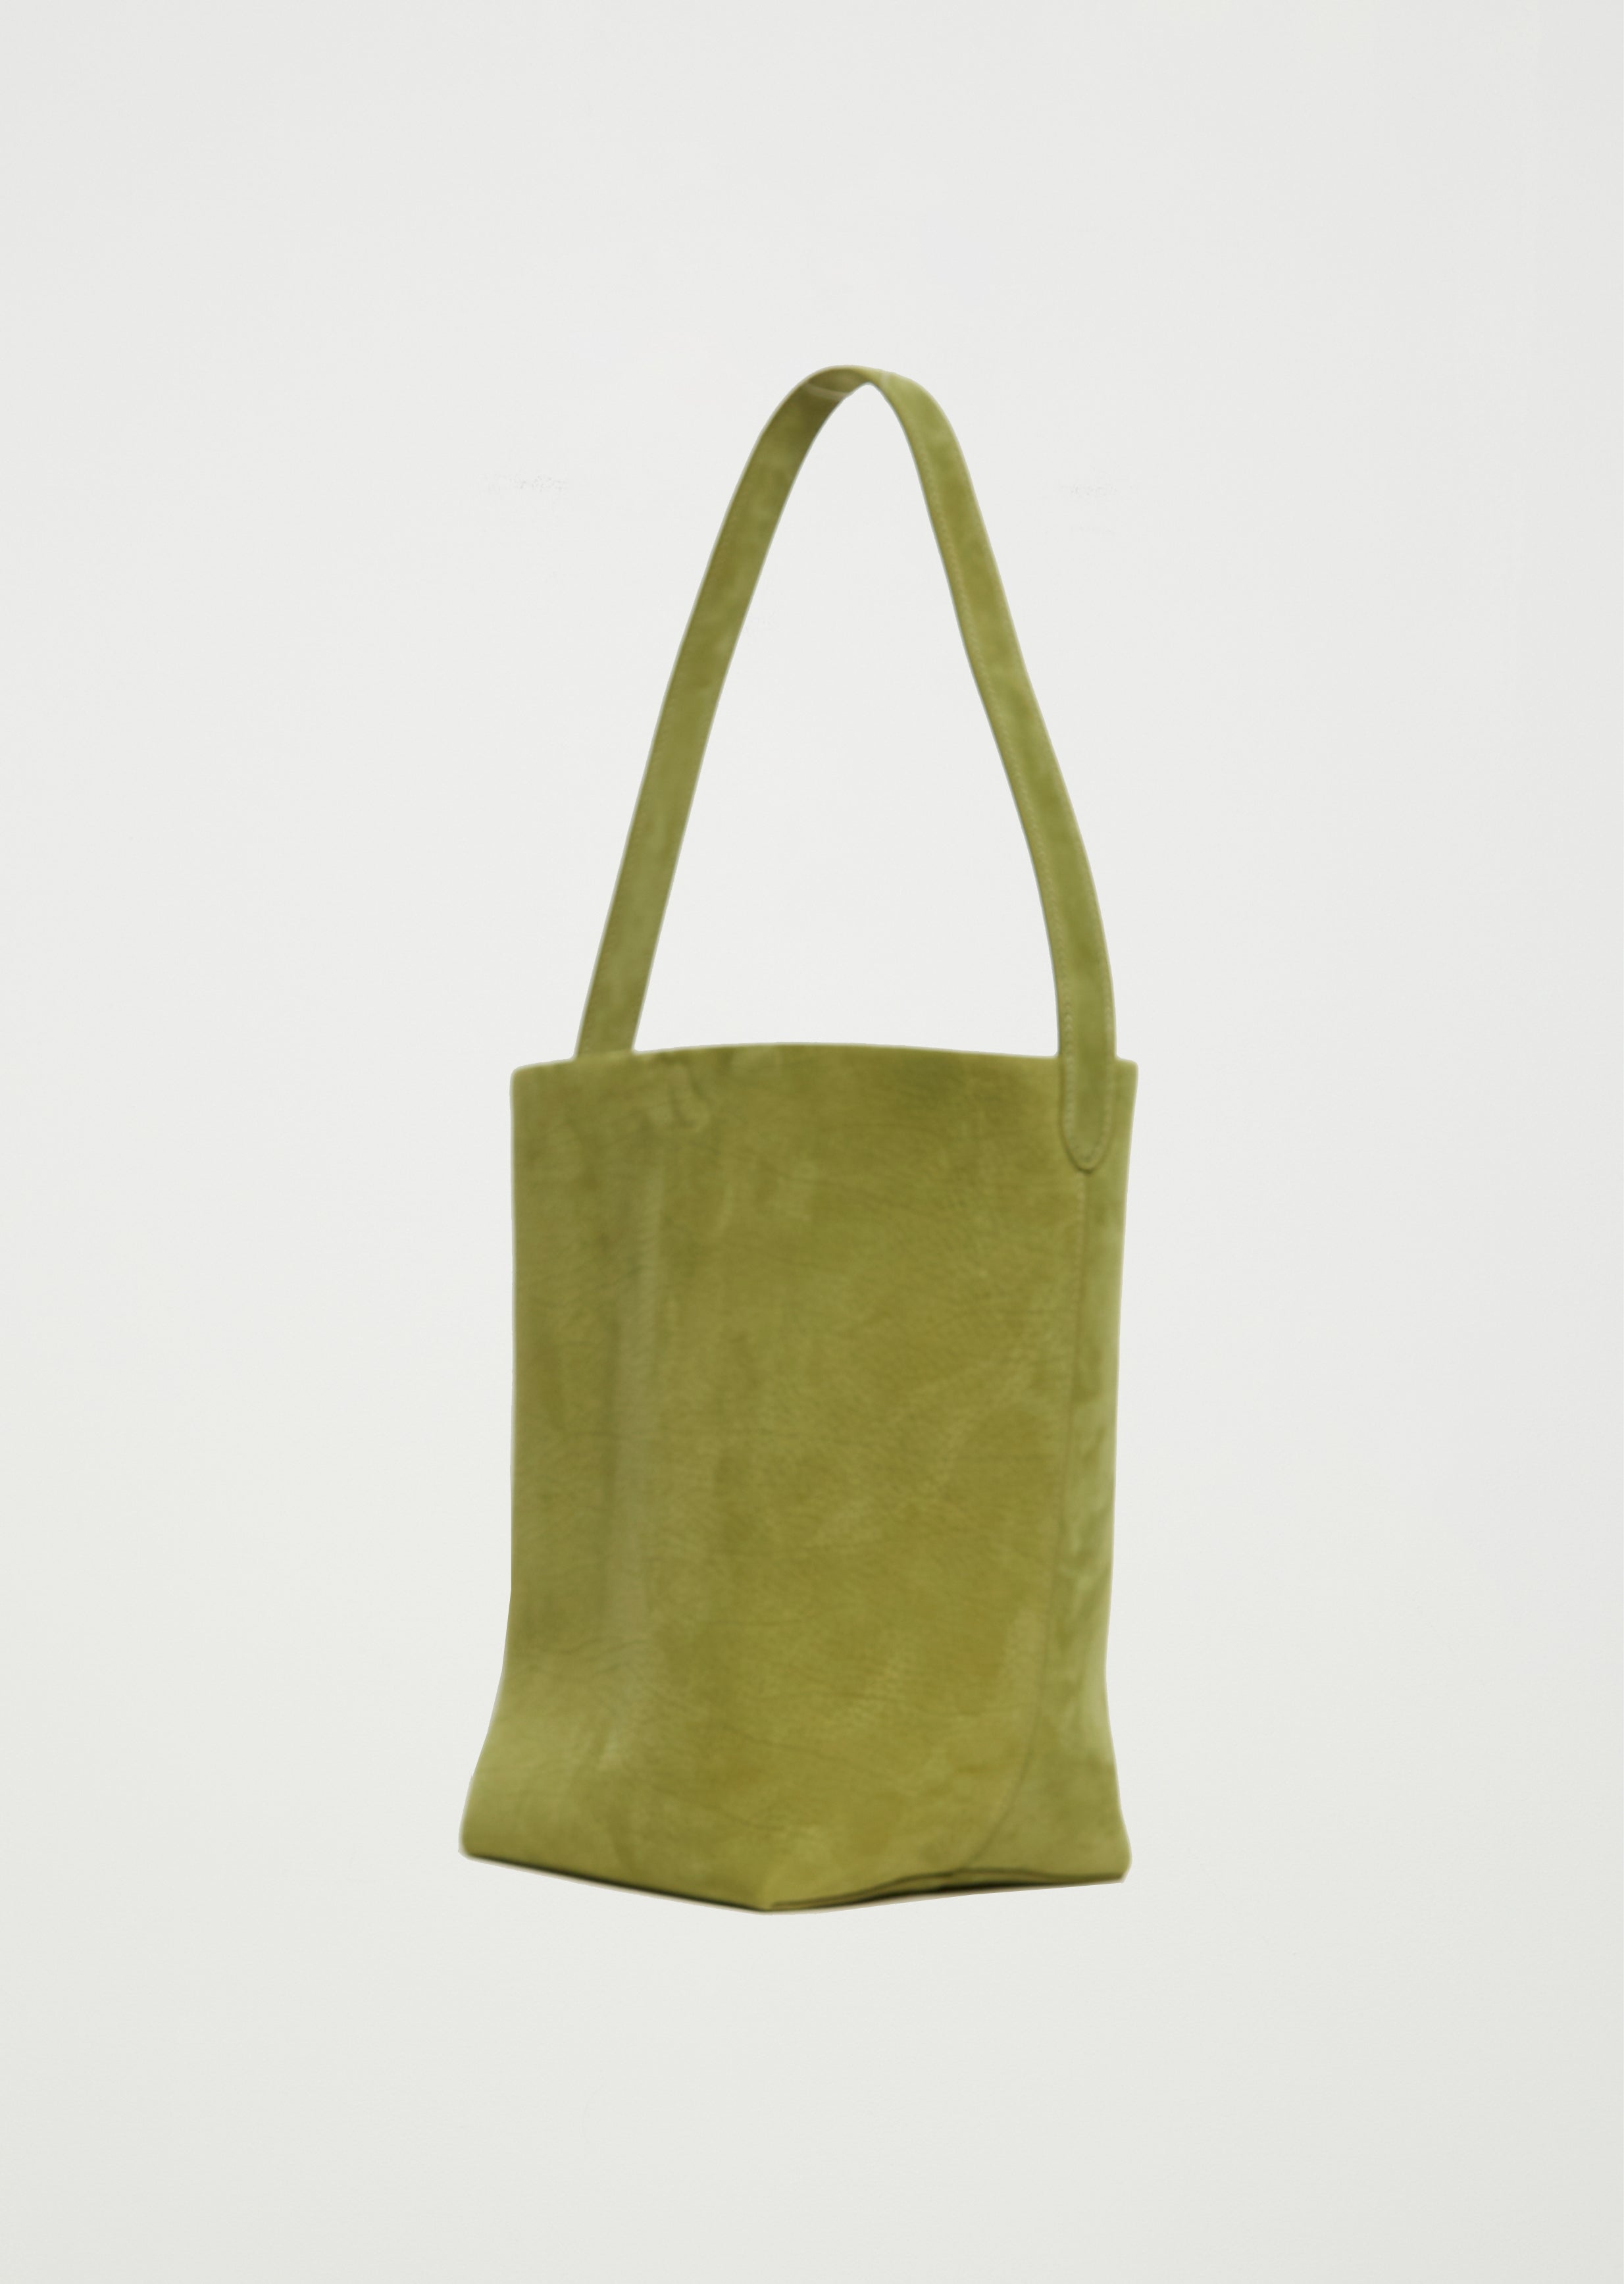 The Row Large Suede ''North/South'' Park Tote in Sea Moss Green